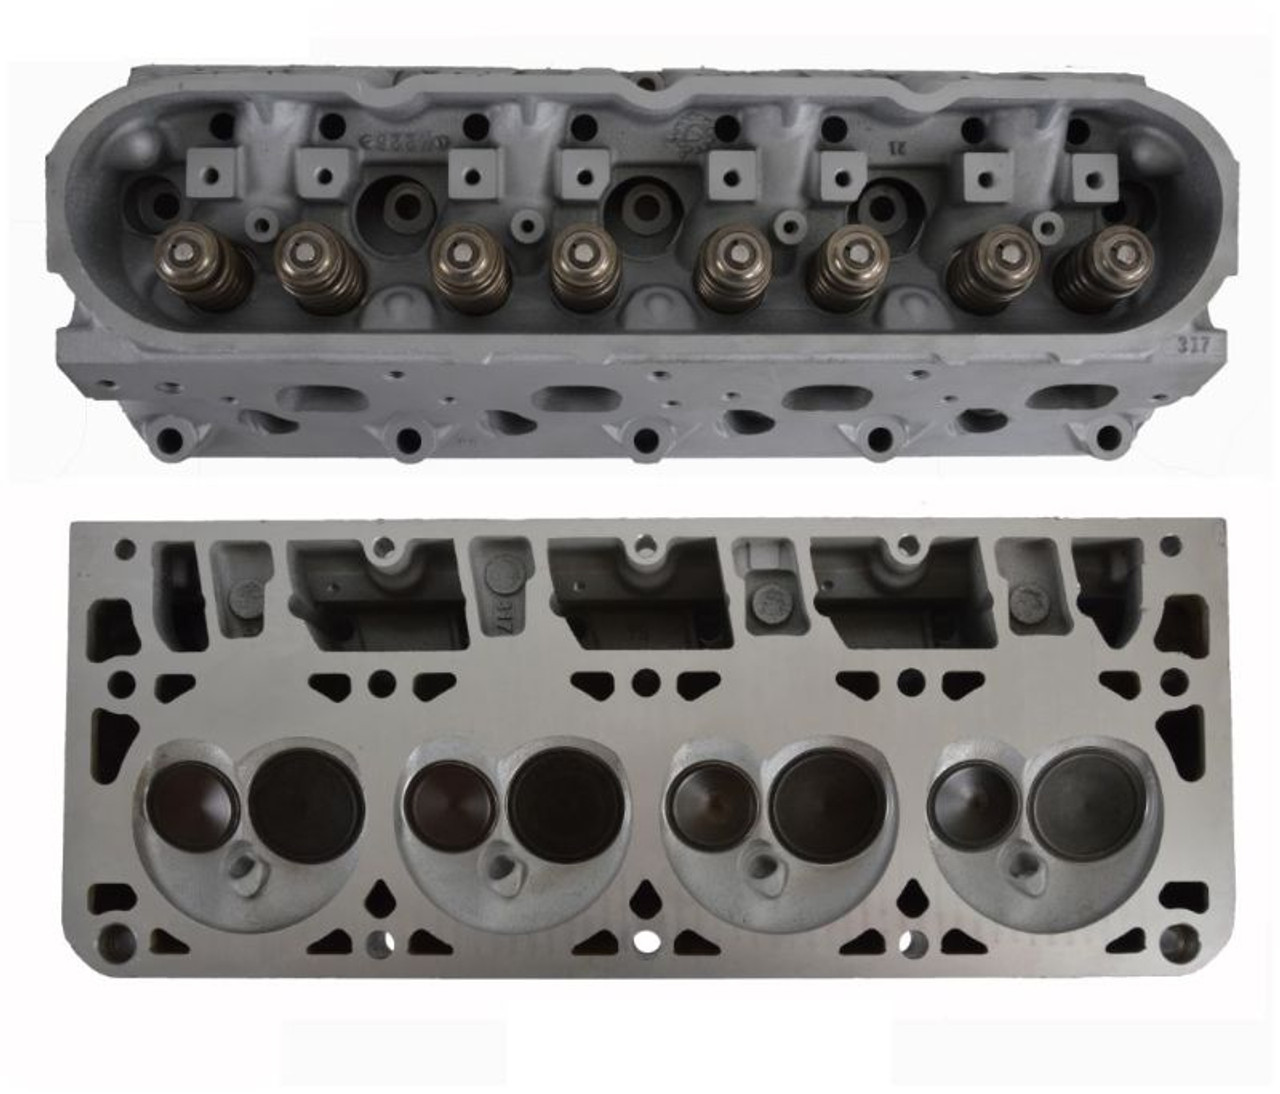 2006 Chevrolet SSR 6.0L Engine Cylinder Head Assembly CH1079R -142